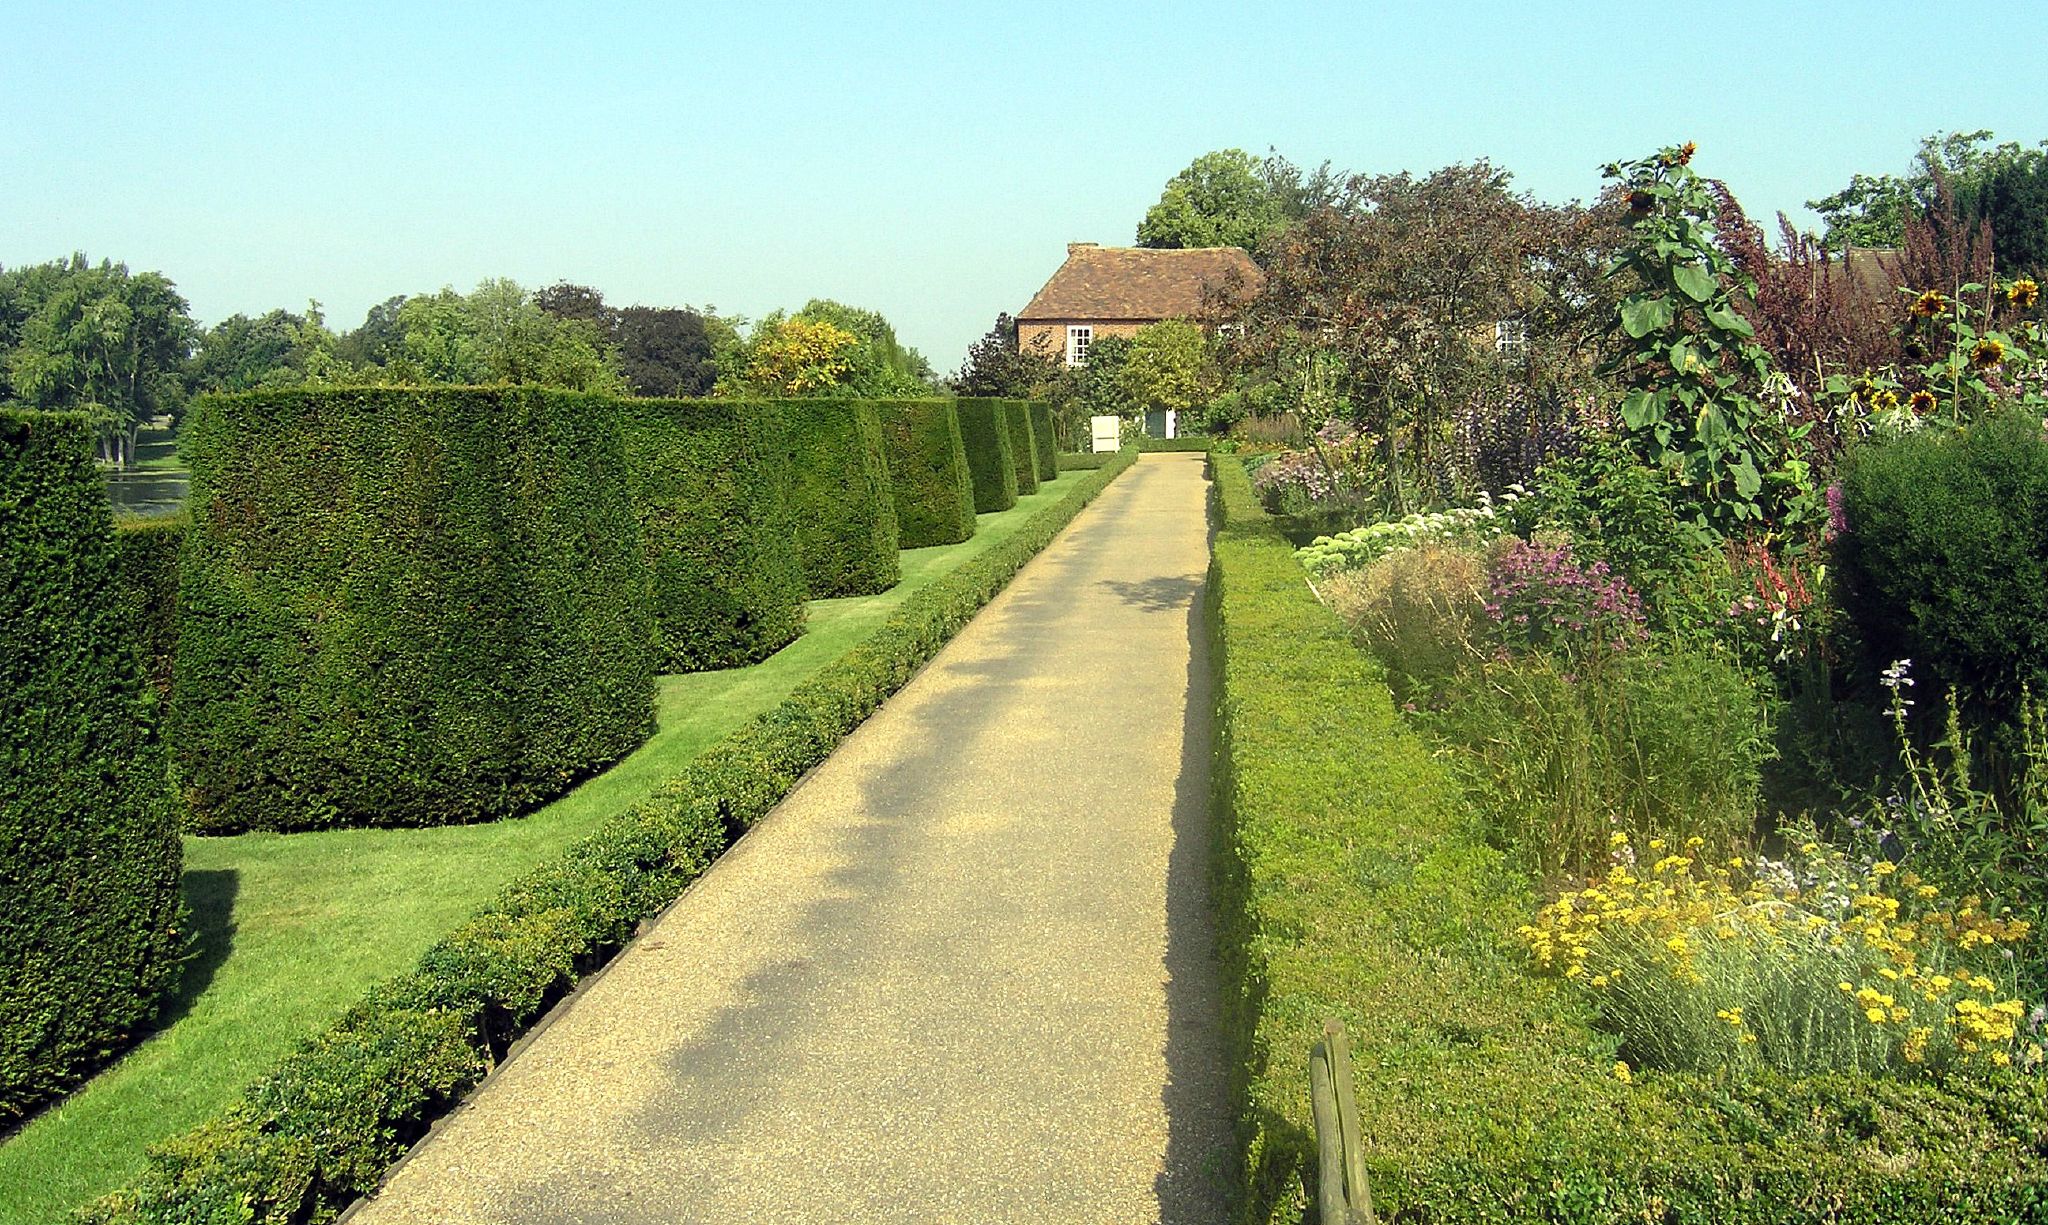 a view of a long path in a hedge garden